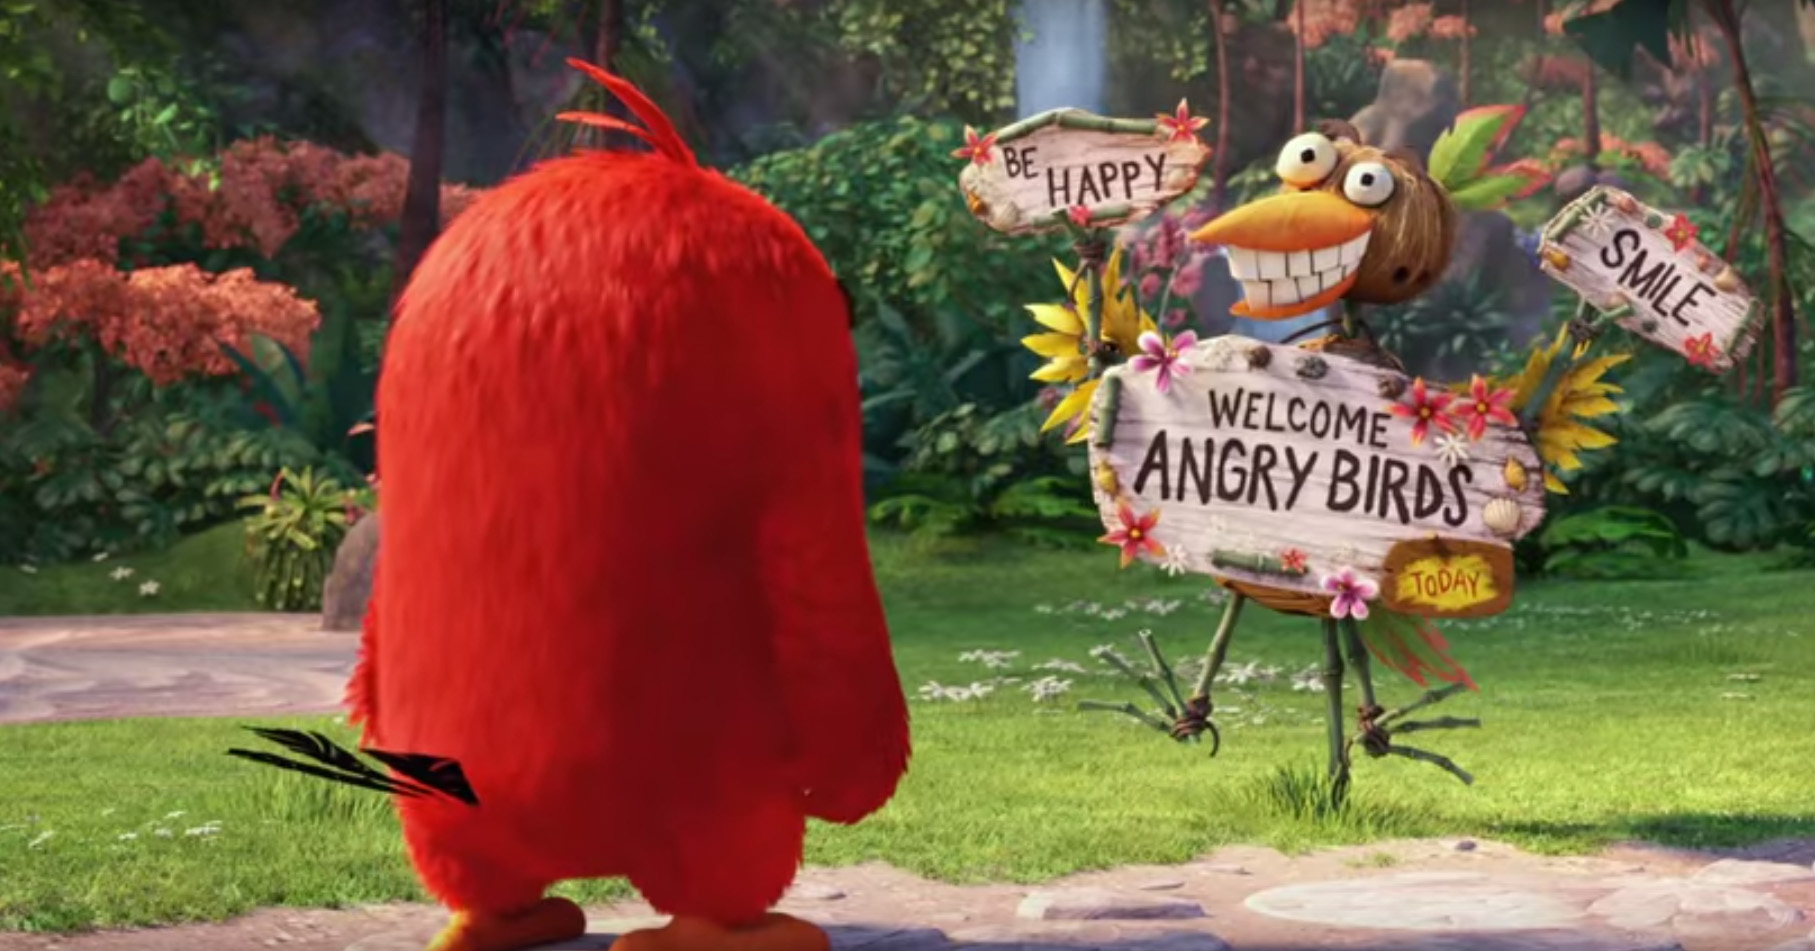 The feathers fly in the first Angry Birds movie trailer